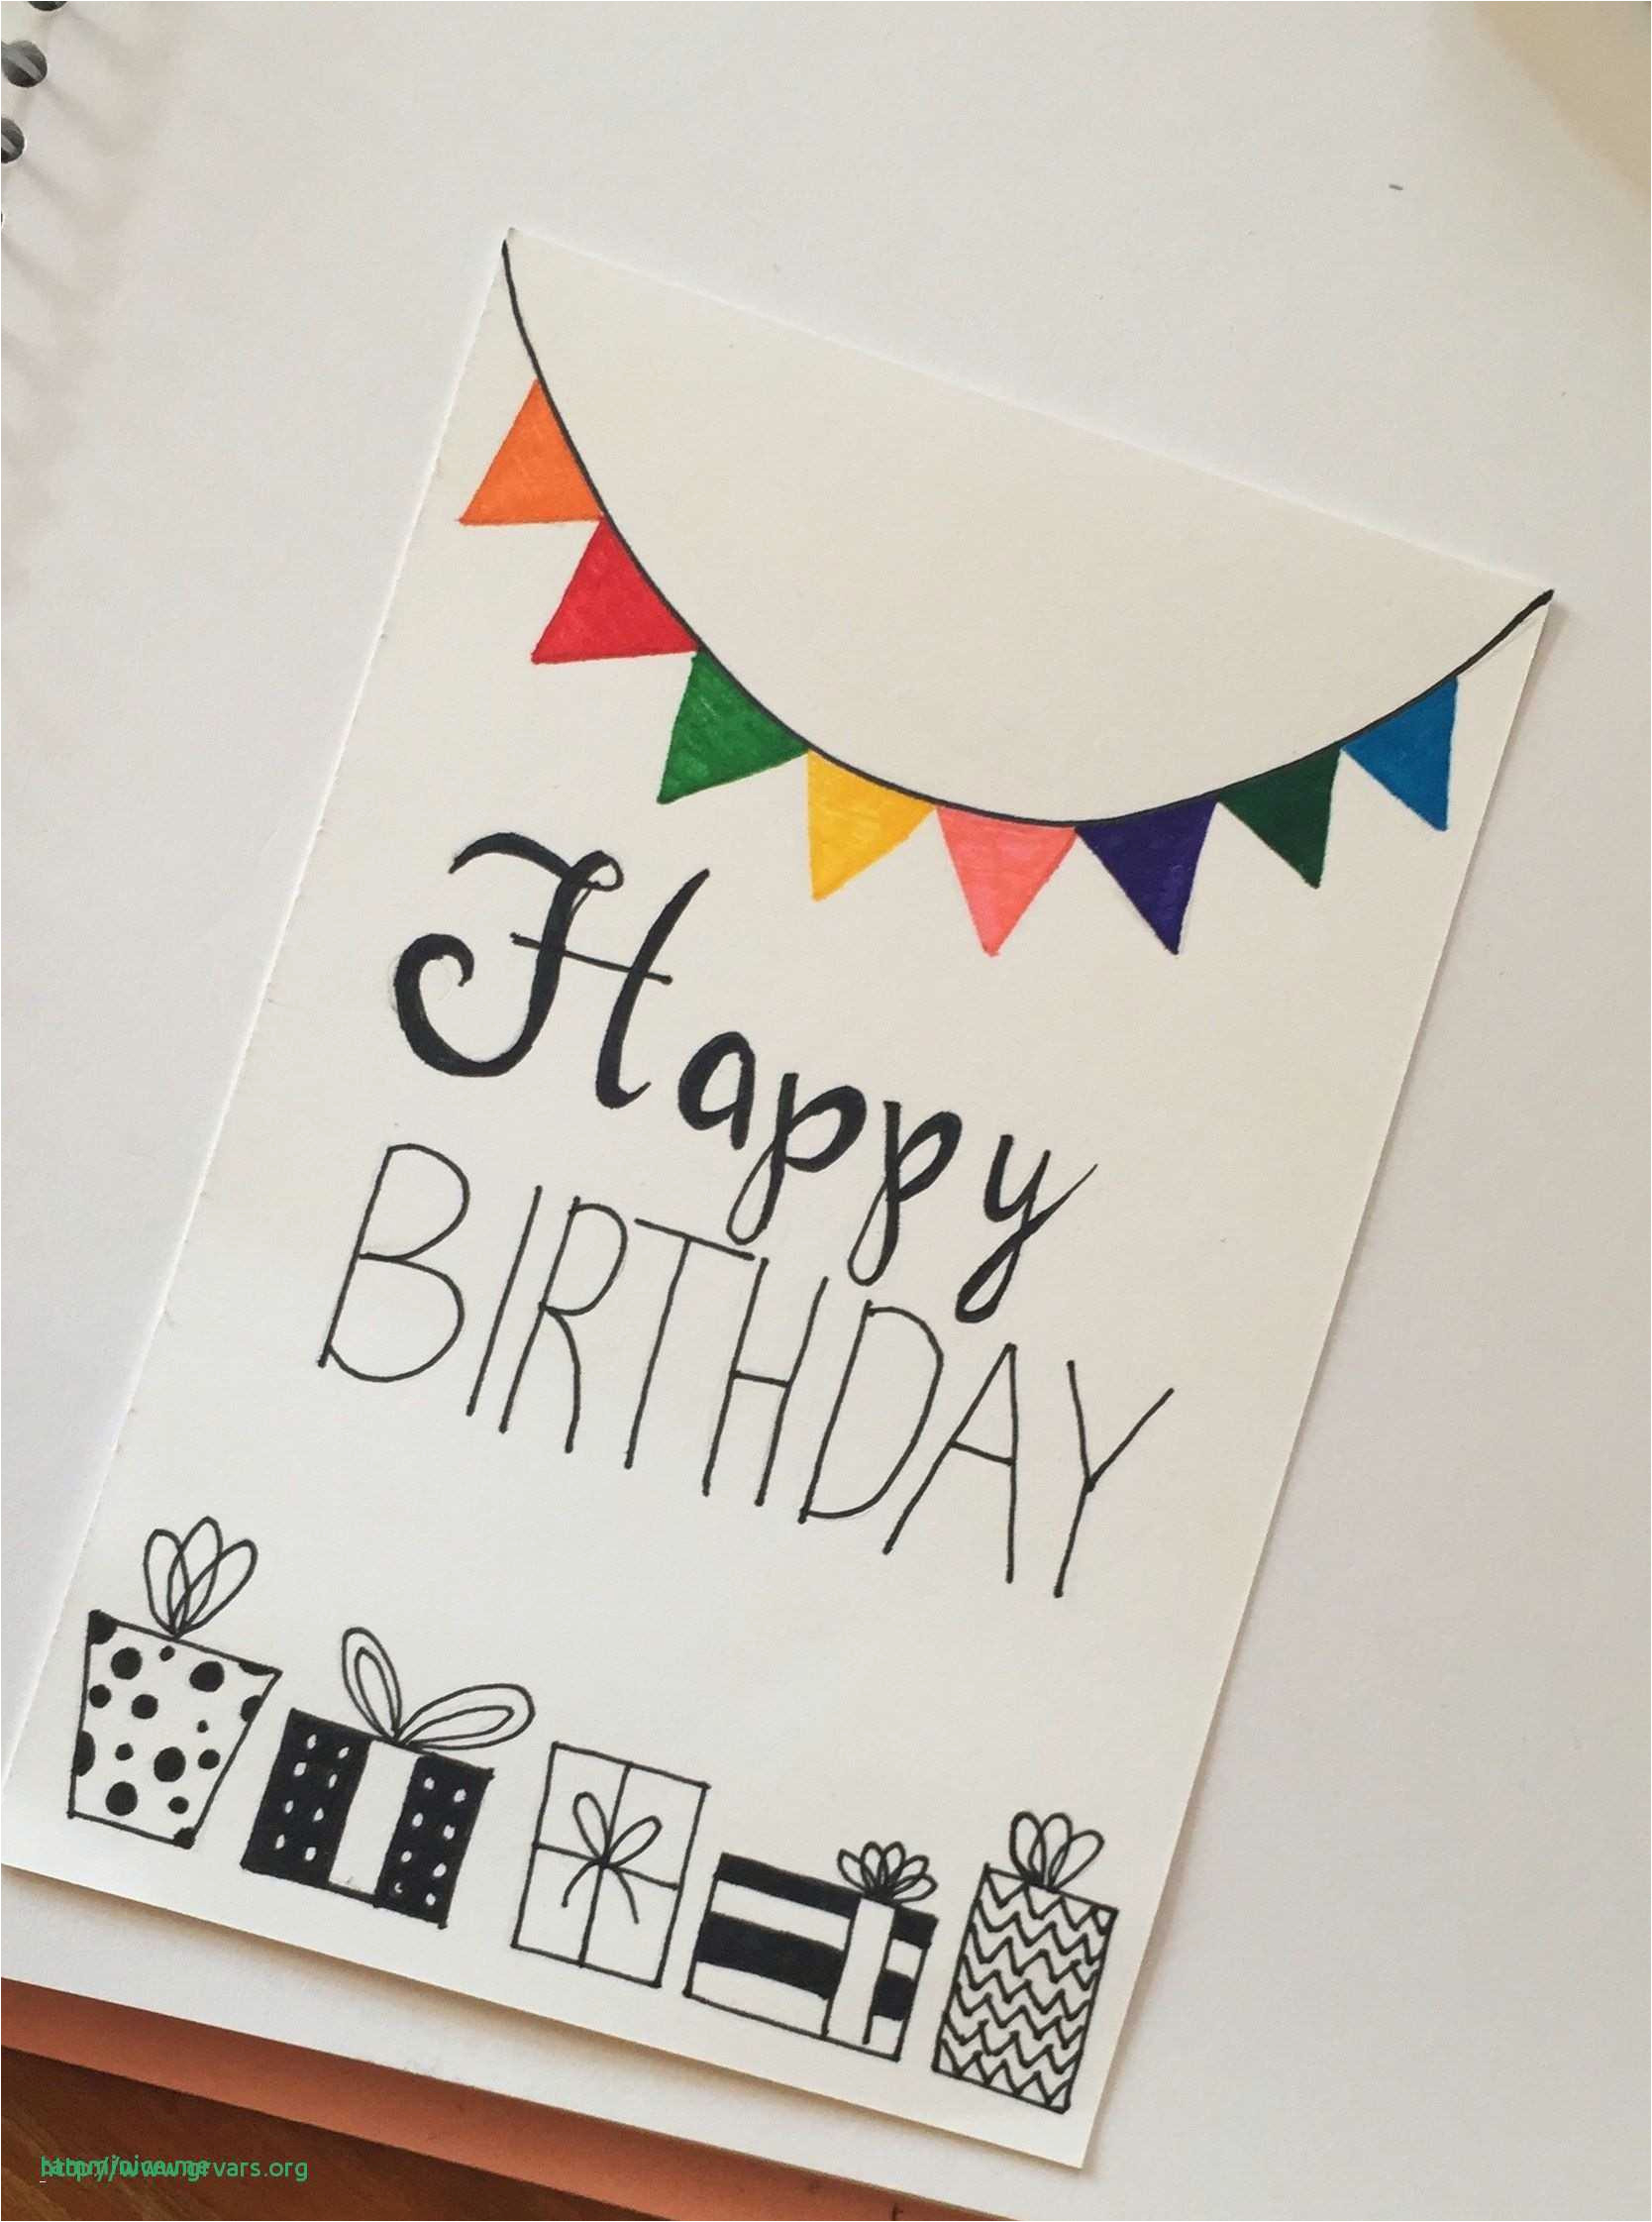 Creative Birthday Card Ideas For Friends How To Make Diy Birthday Cards For Best Friend Simple Handmade